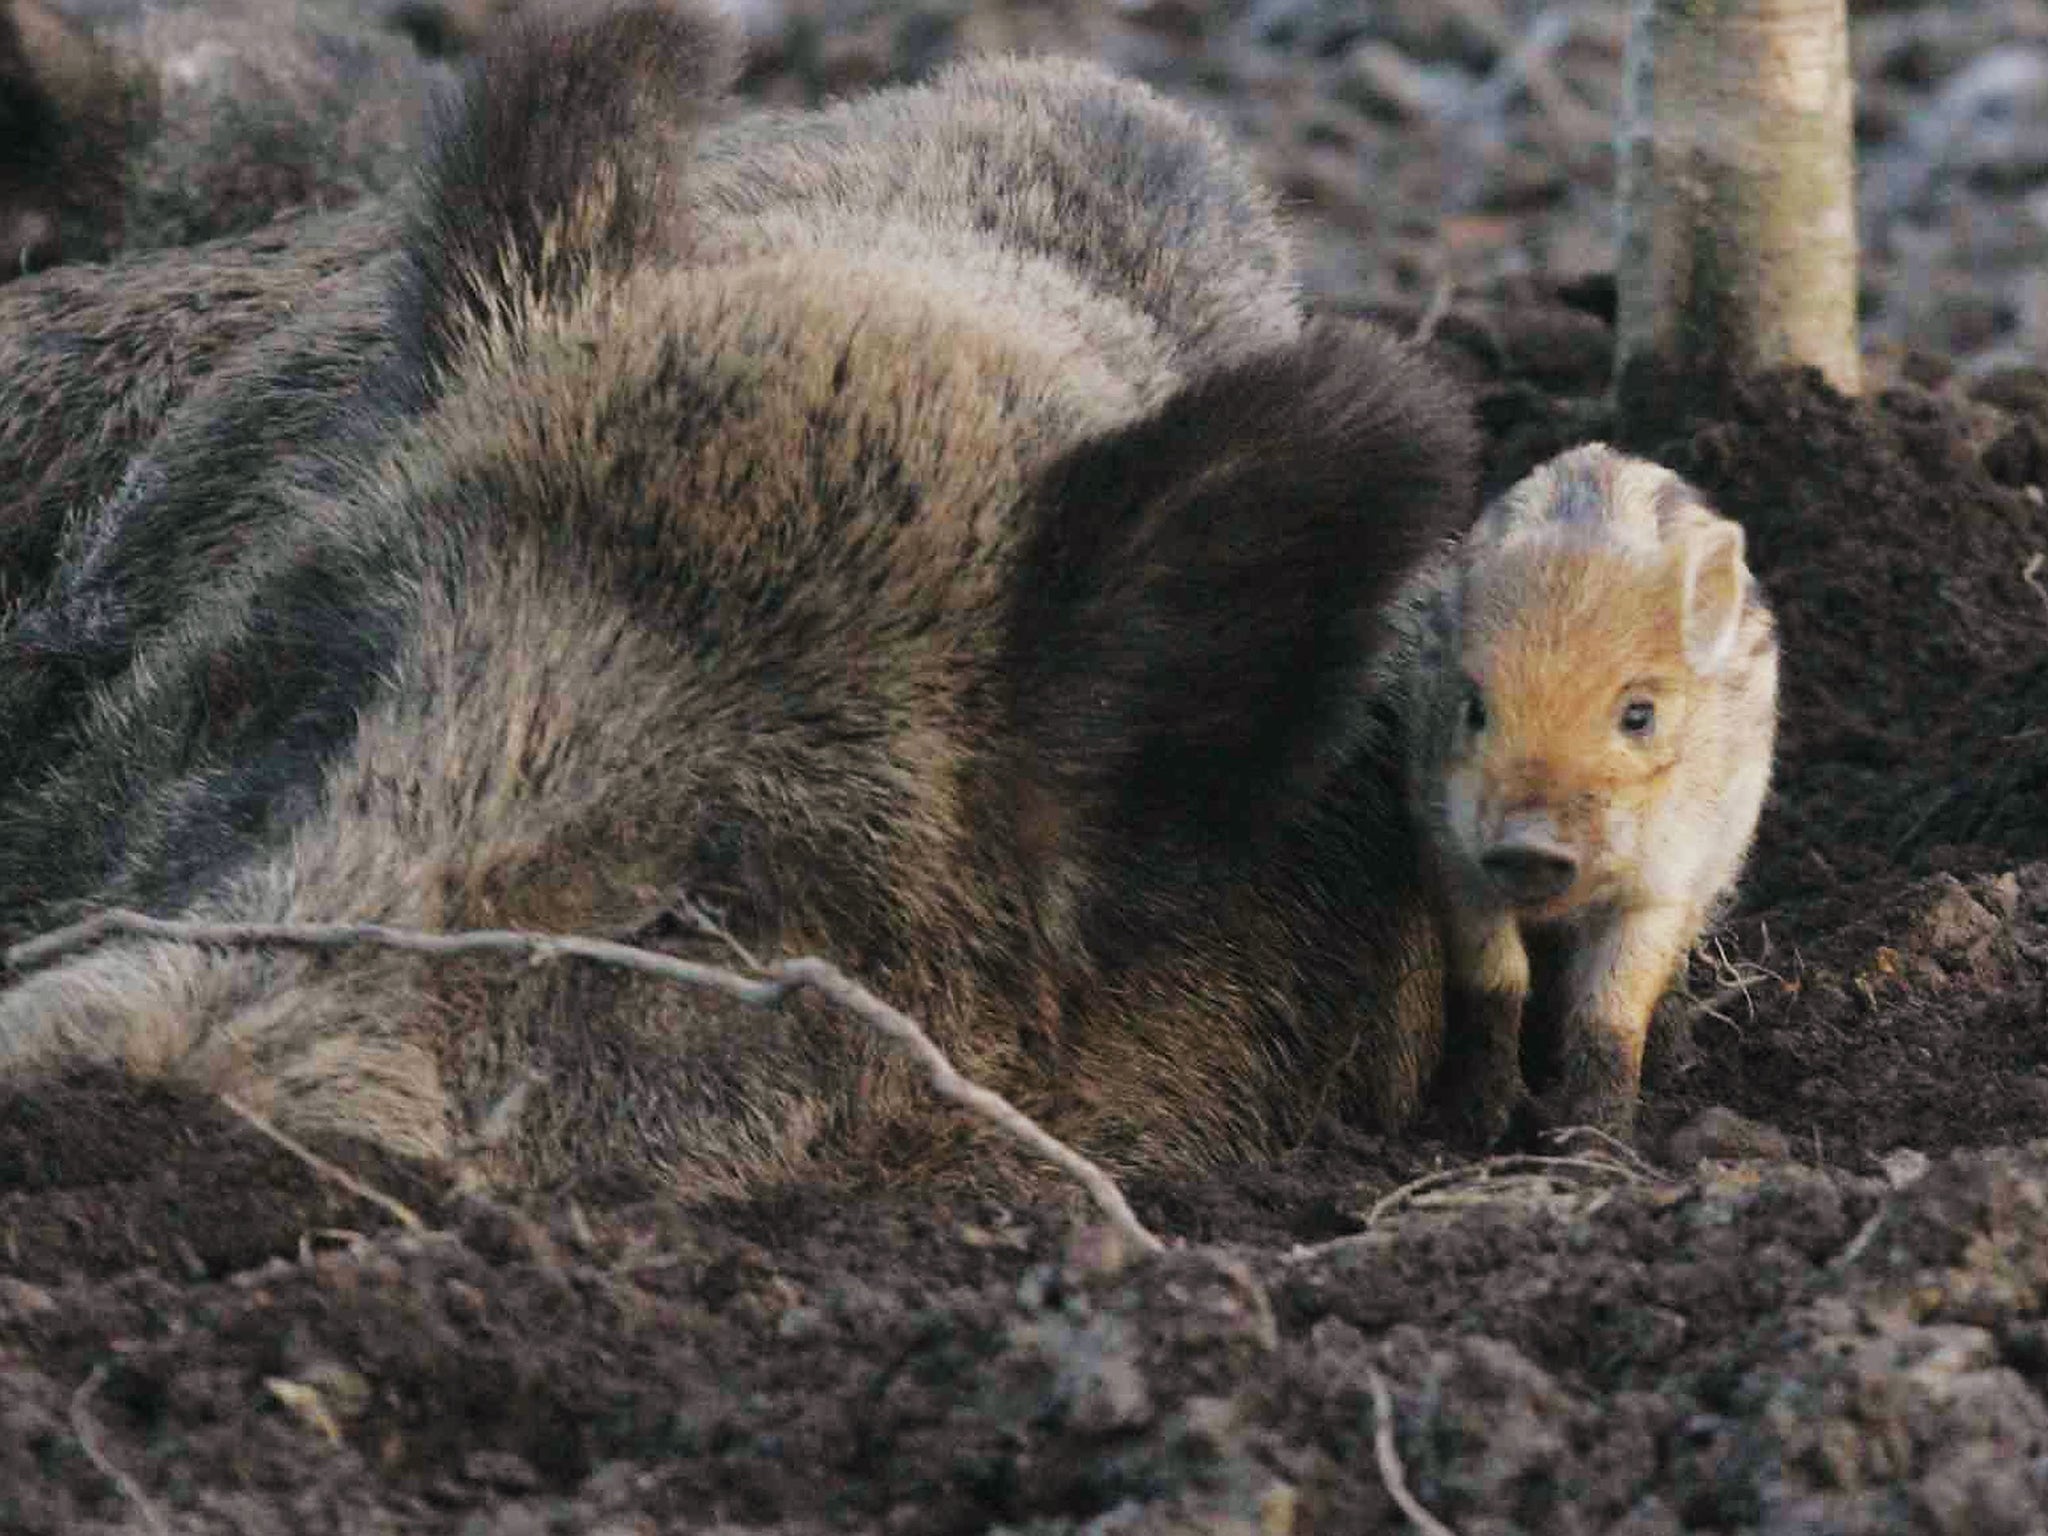 Baby boars are starving to death when their mothers are killed, one expert said